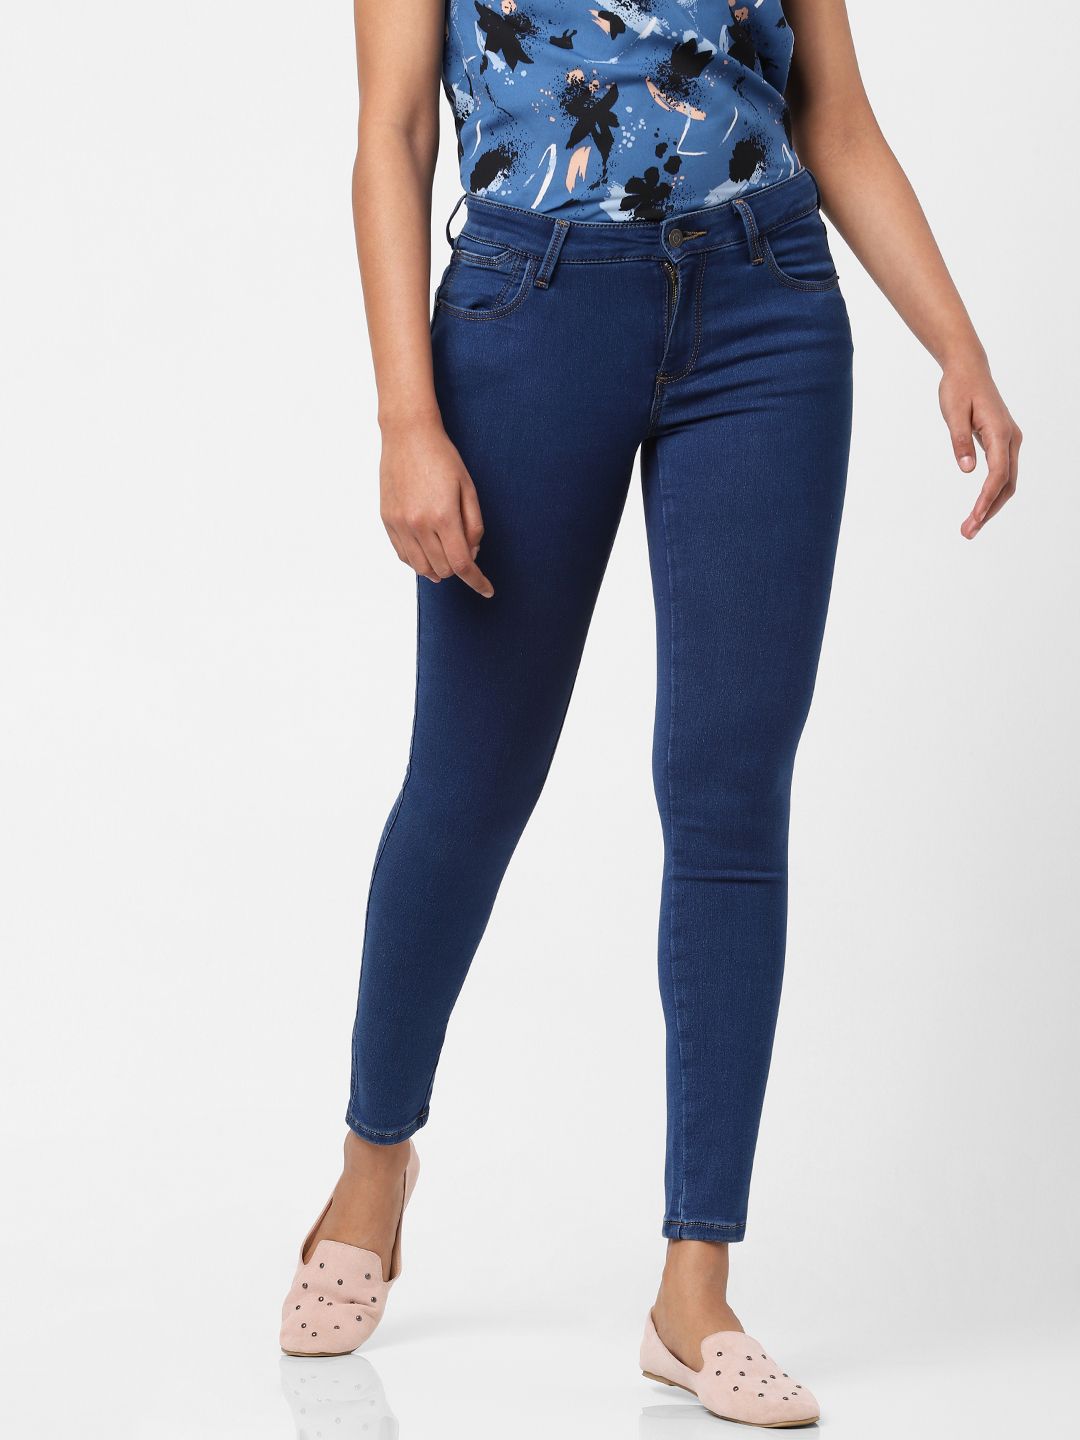 Vero Moda Women Blue Skinny Fit Mid-Rise Stretchable Jeans Price in India